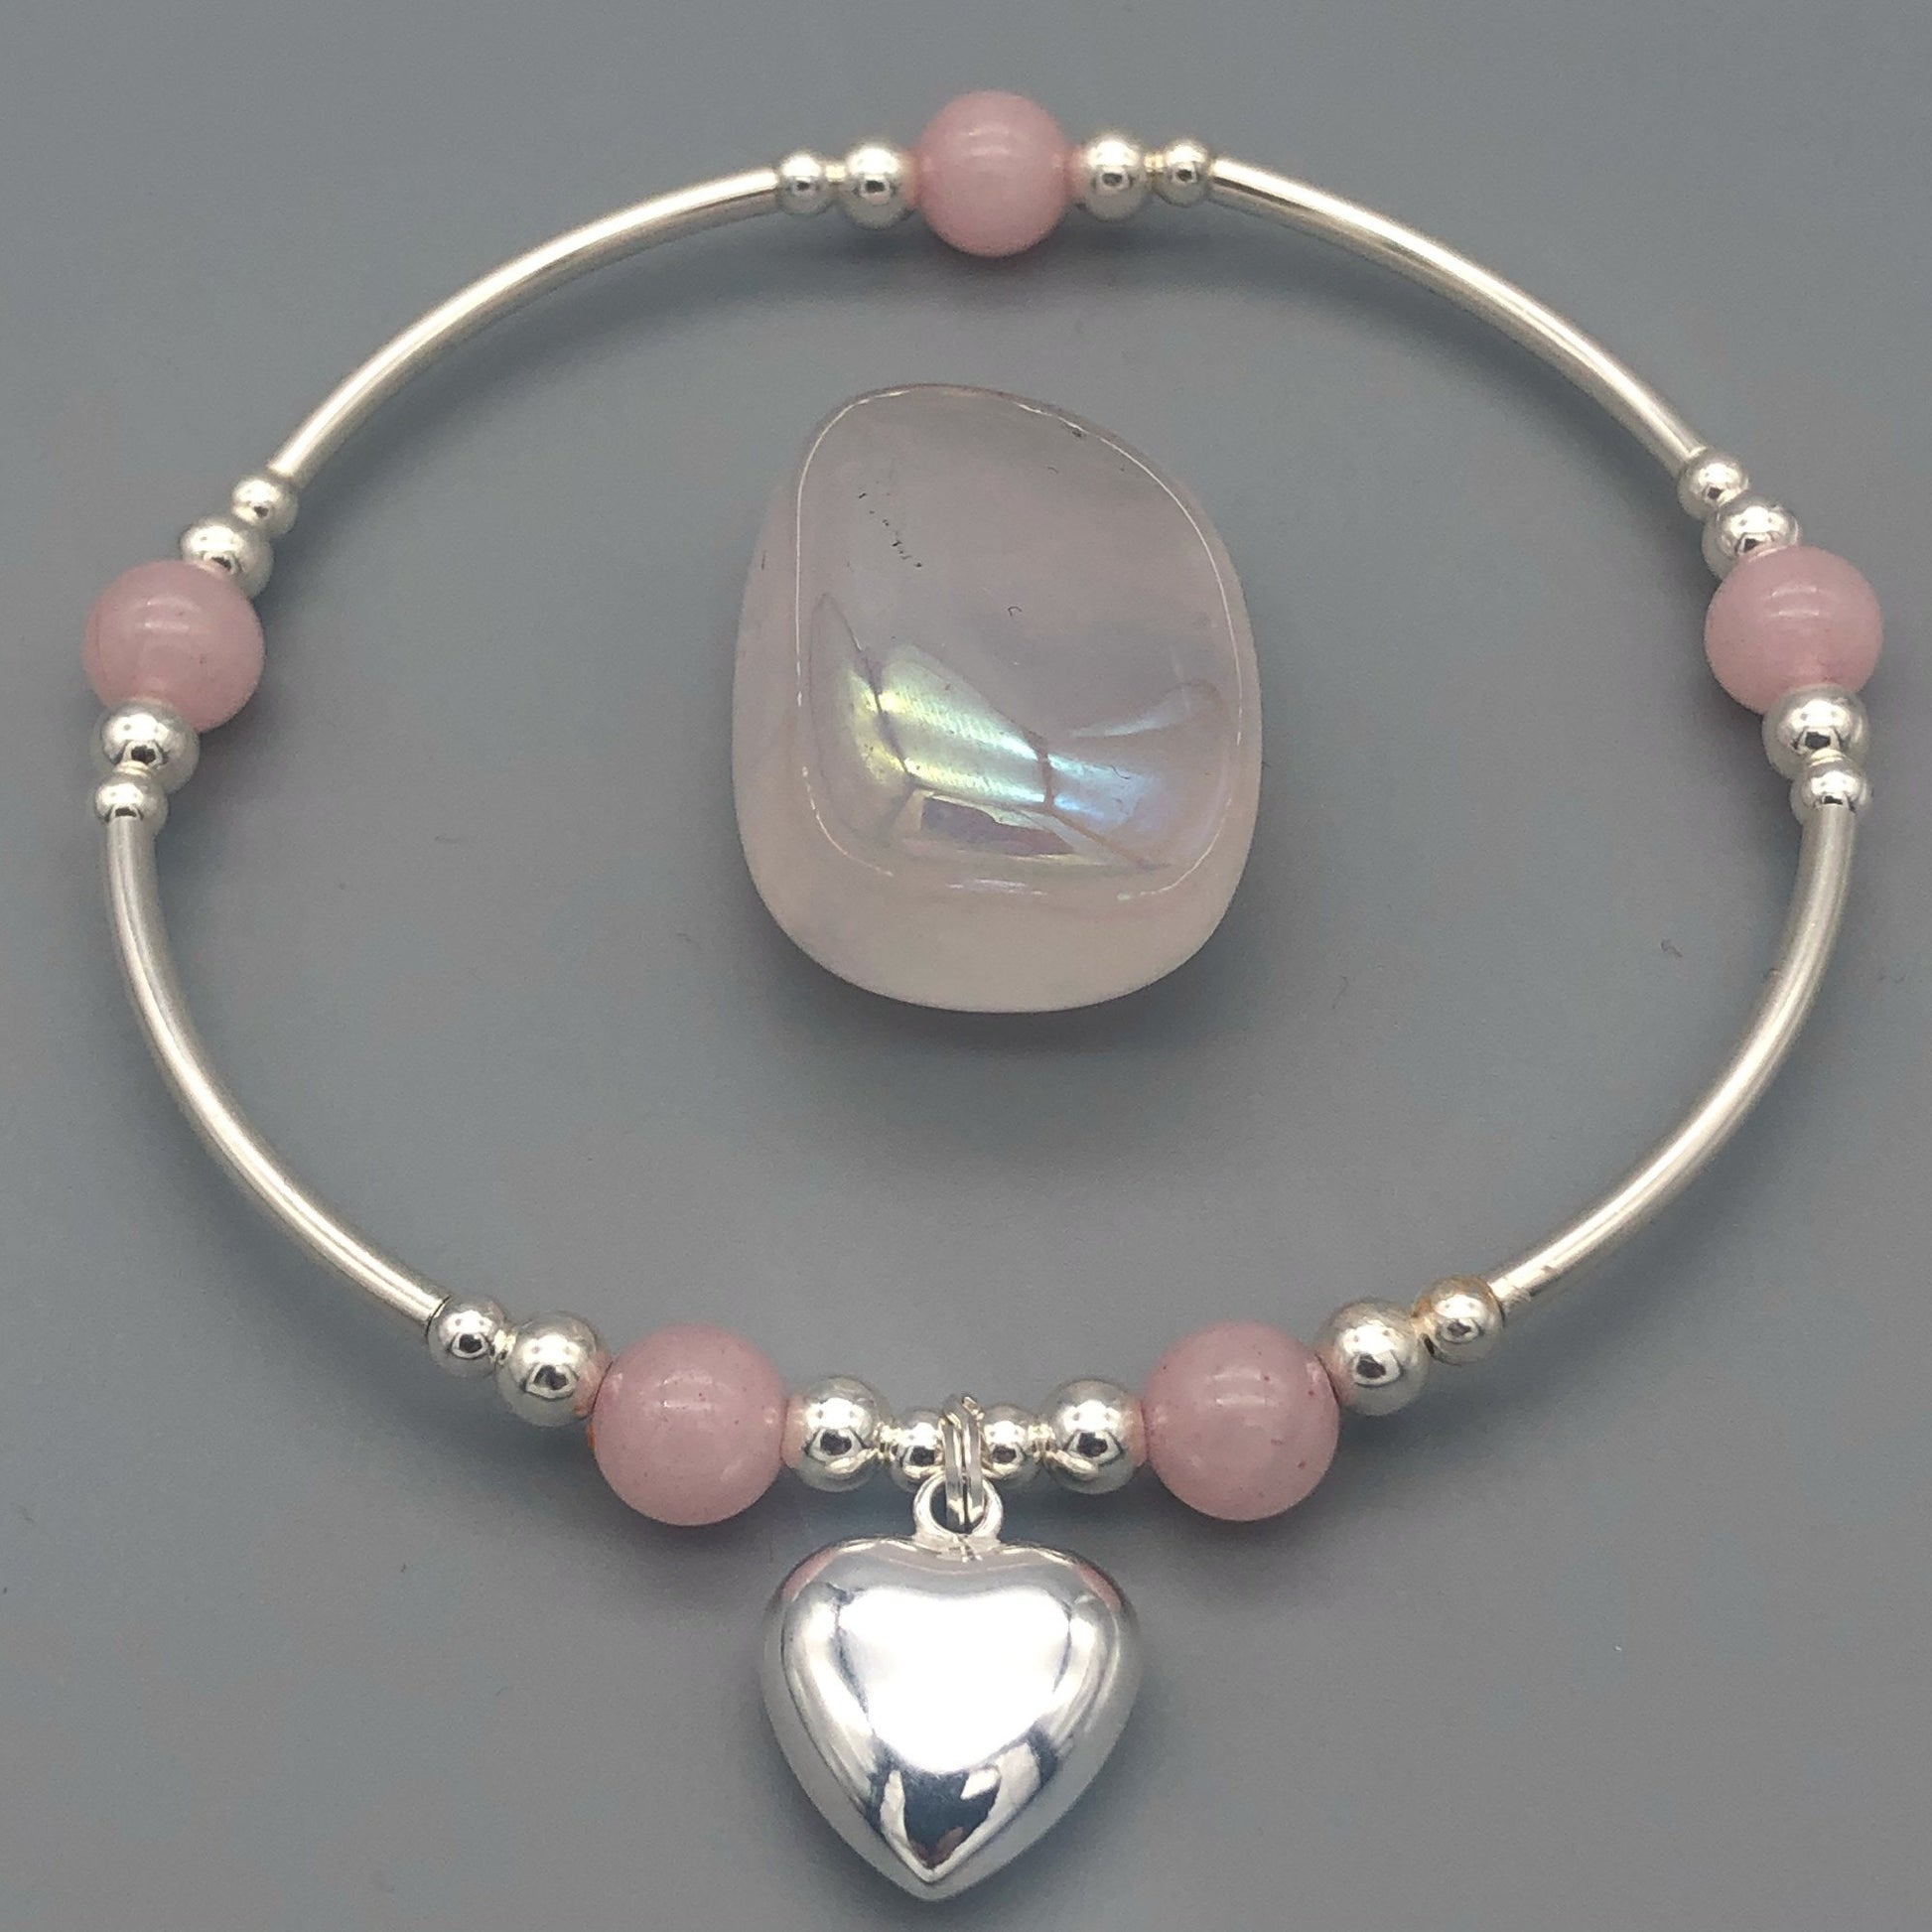 Rose quartz solid heart charm sterling silver girl's stacking bracelet by My Silver Wish